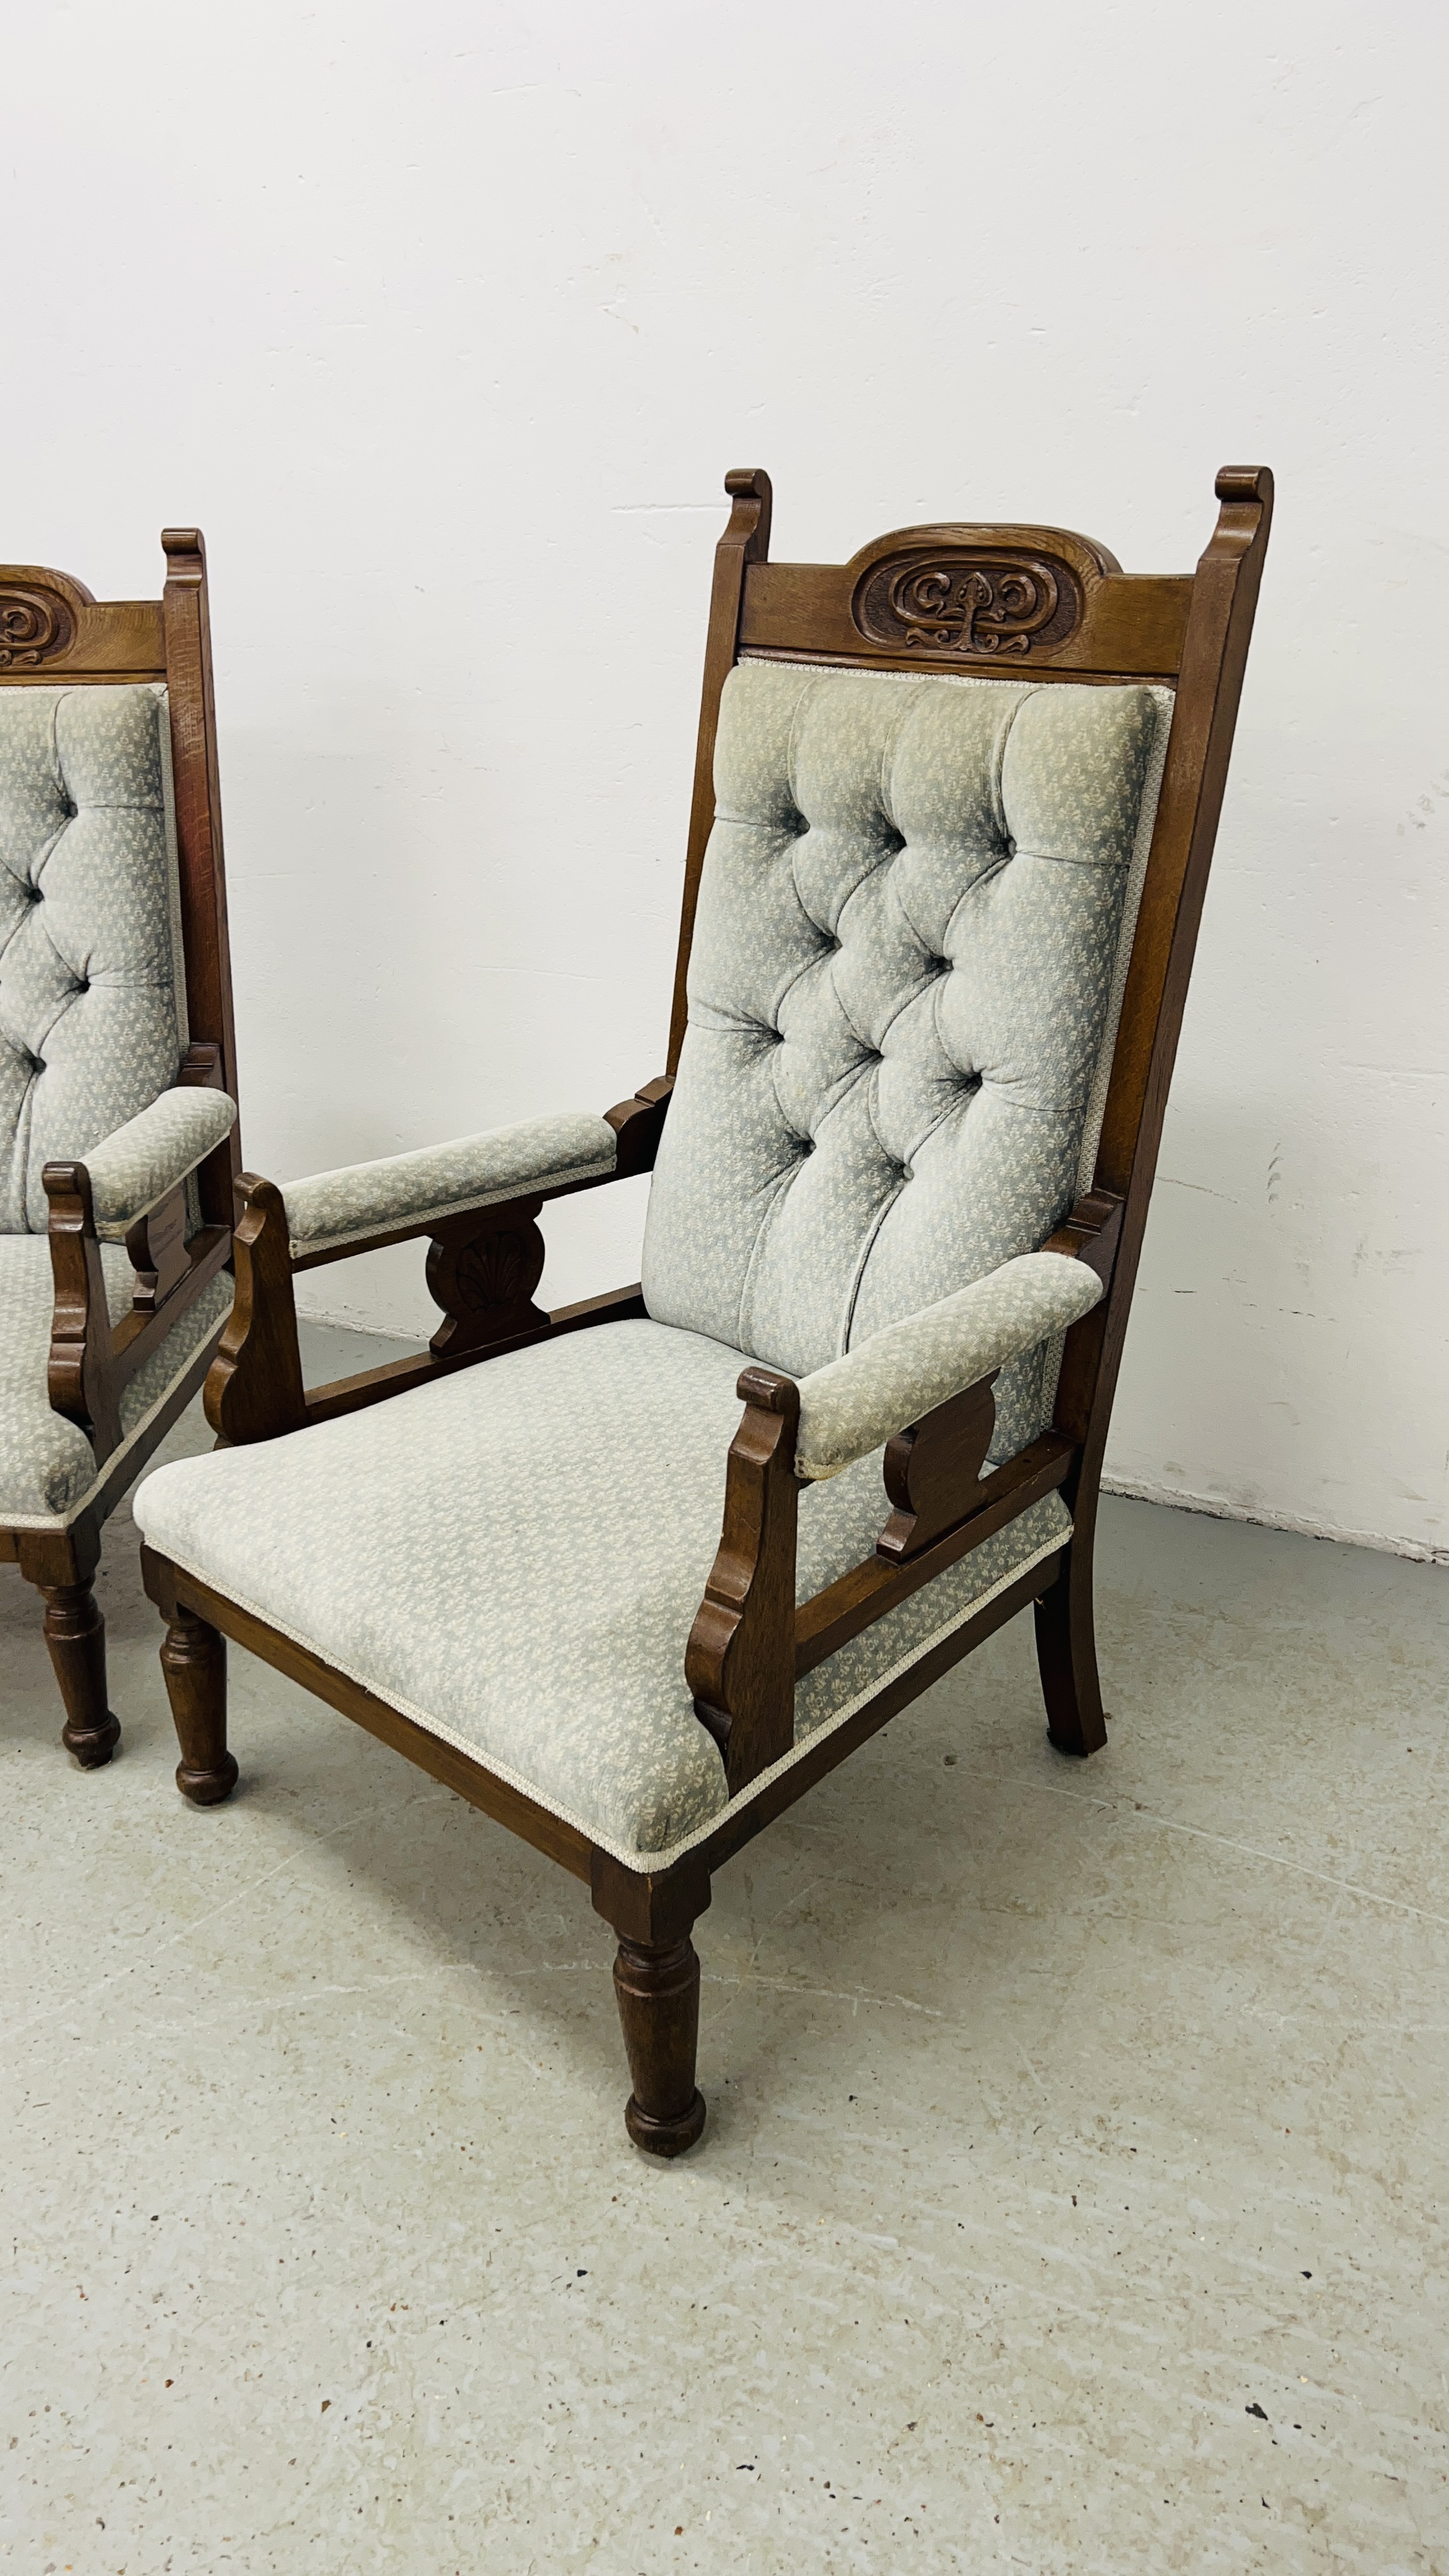 A PAIR OF EDWARDIAN OAK LOW SEAT CHAIRS UPHOLSTERED IN PASTEL BLUE - Image 3 of 11